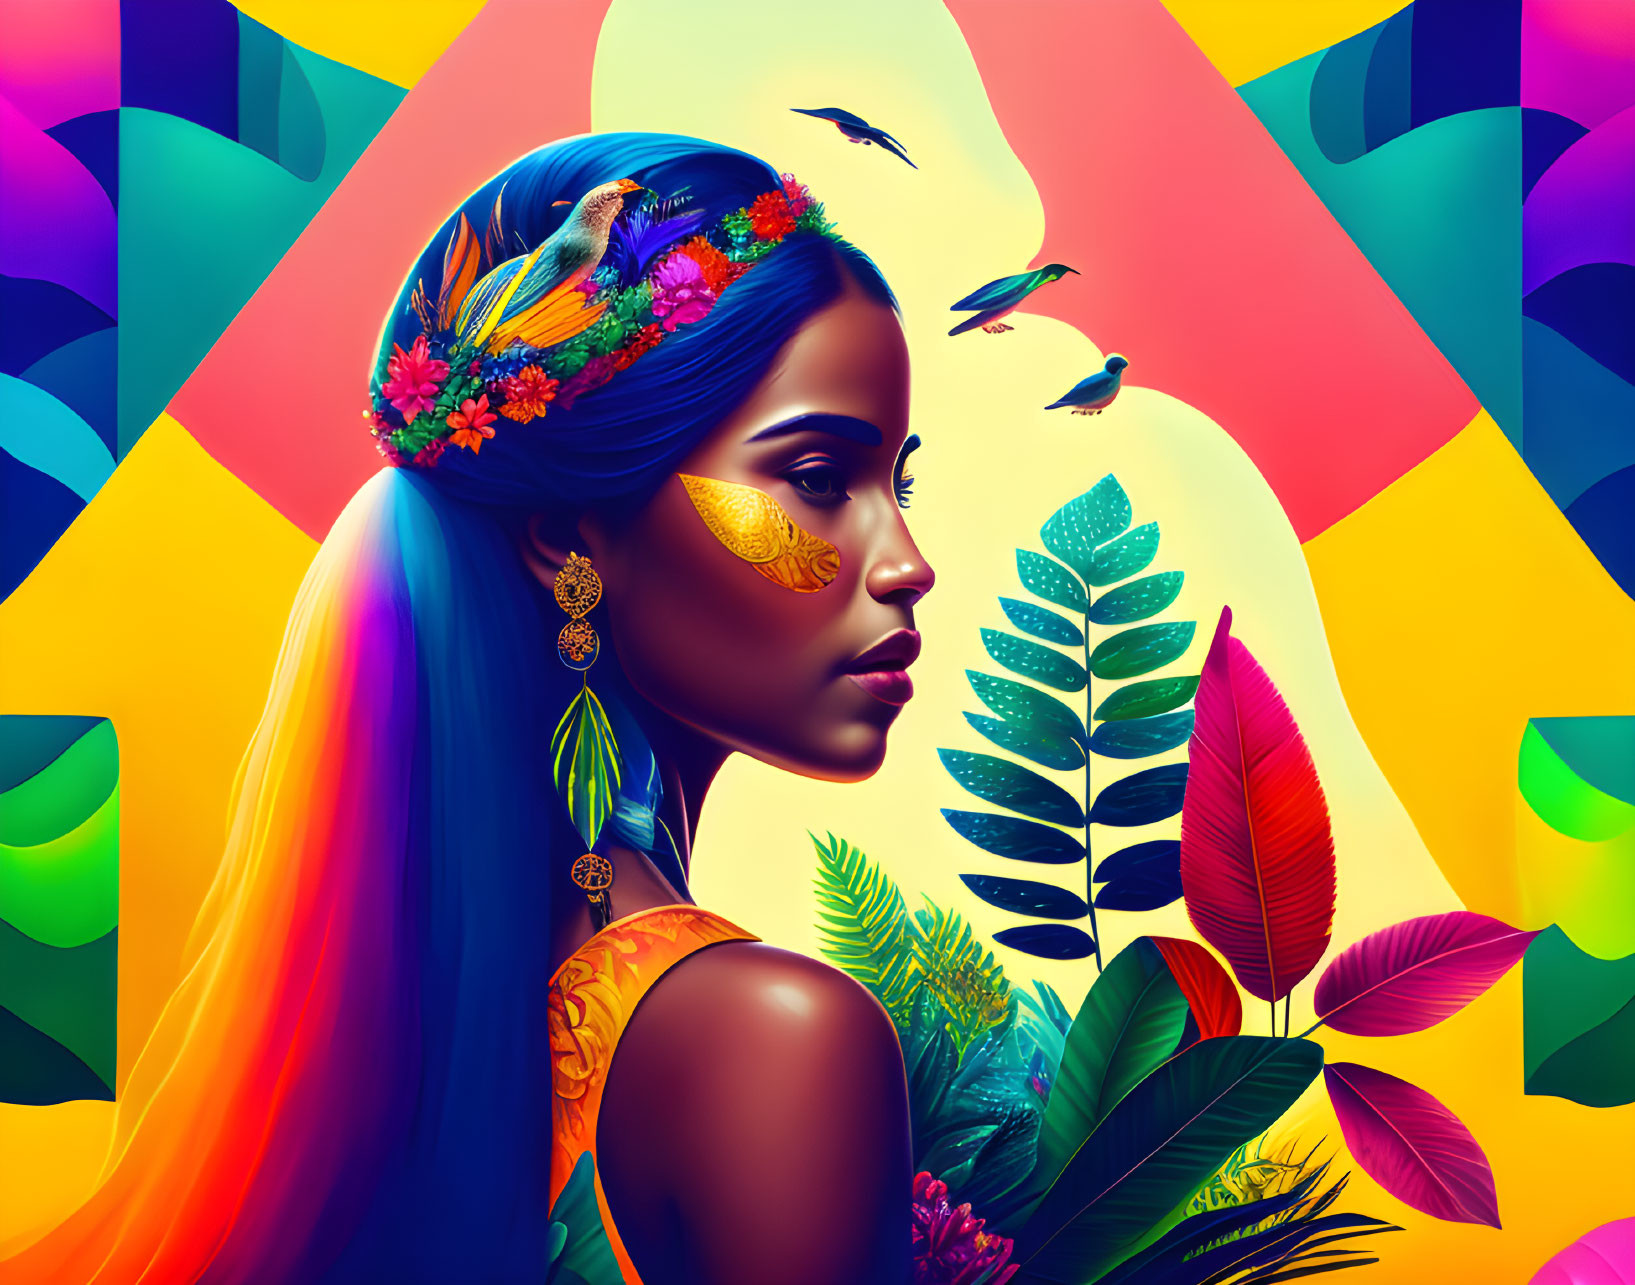 Colorful digital artwork featuring woman with floral and bird motifs in tropical setting.